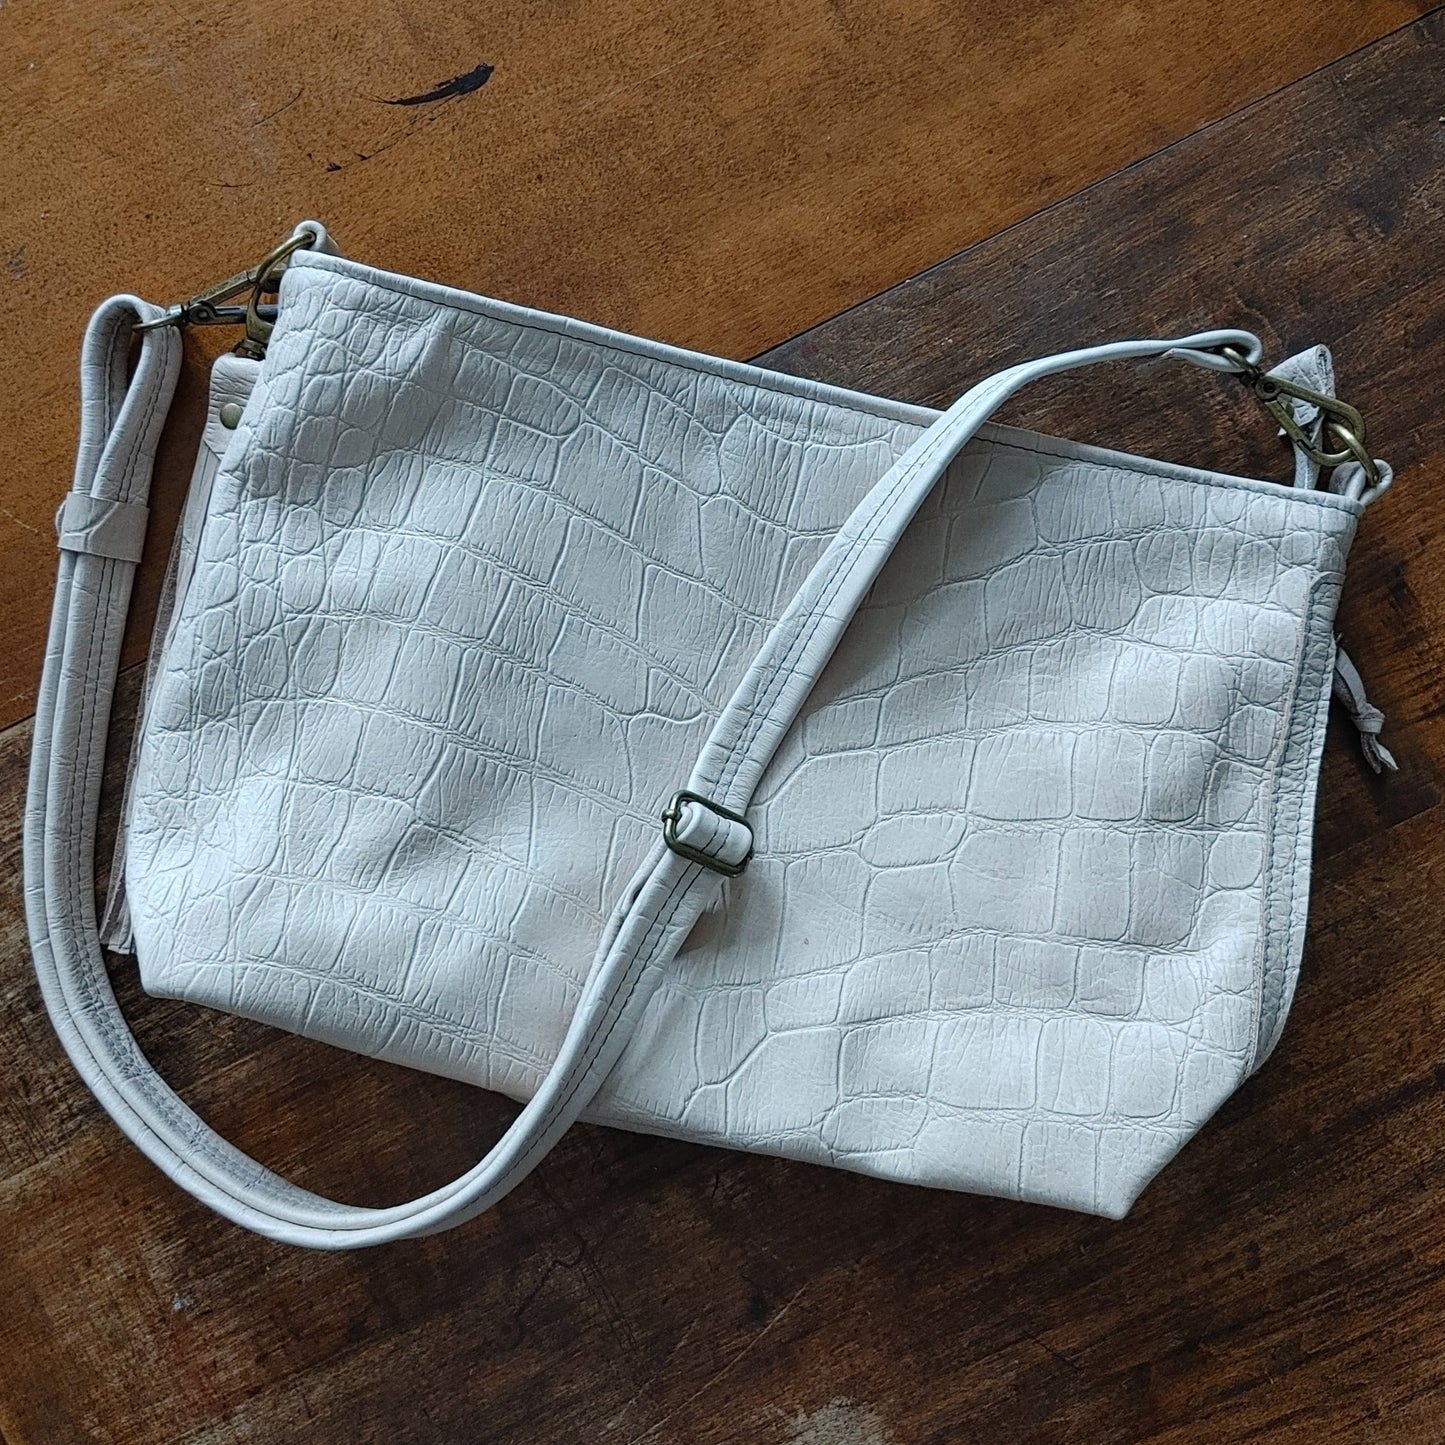 Slouchy Style Zippered Handbag in Ivory Sand Moc Croc Leather